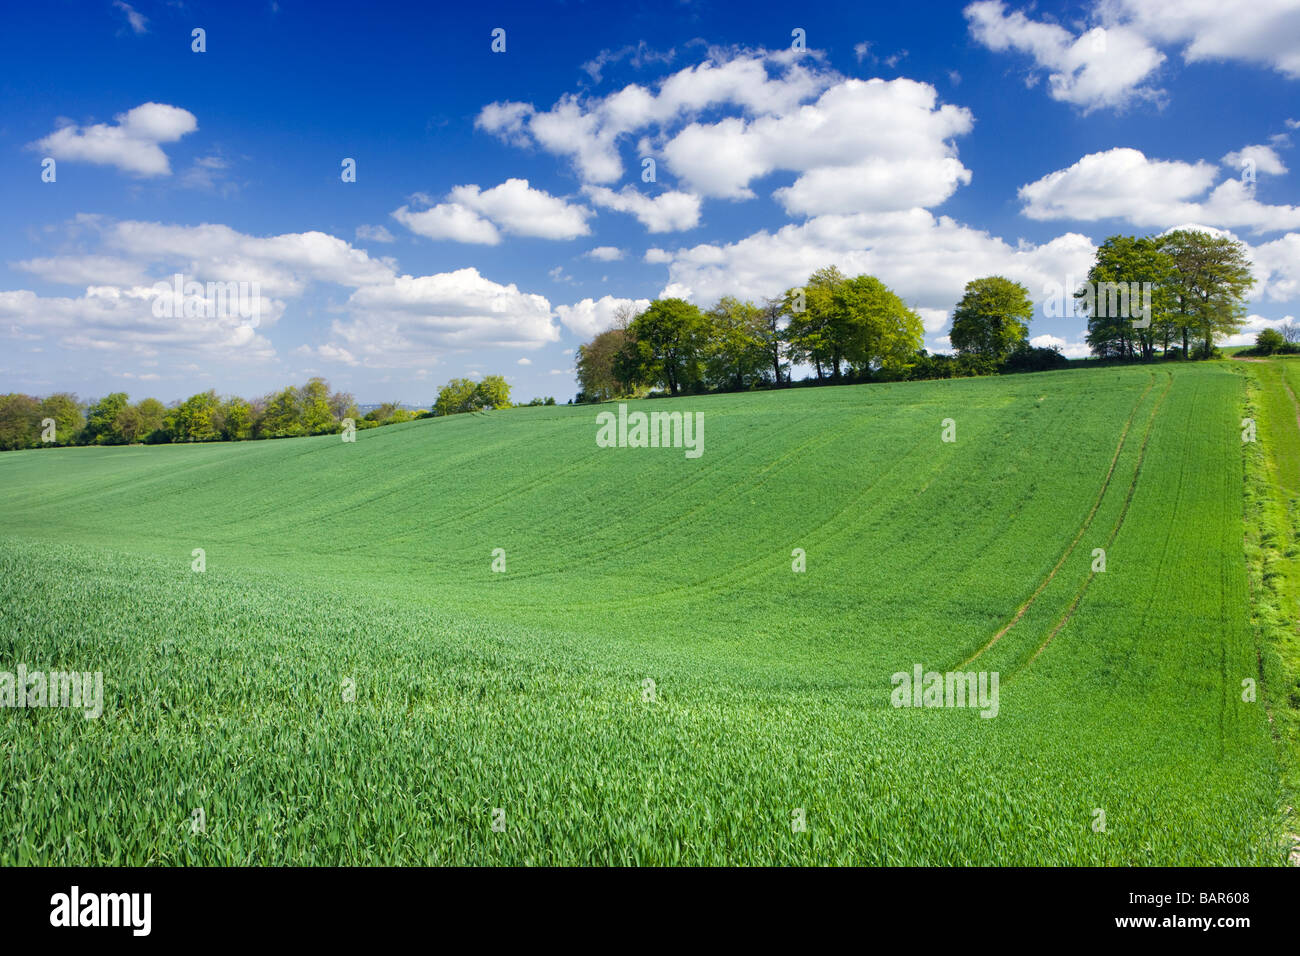 Farm field with young crop. Surrey, UK Stock Photo